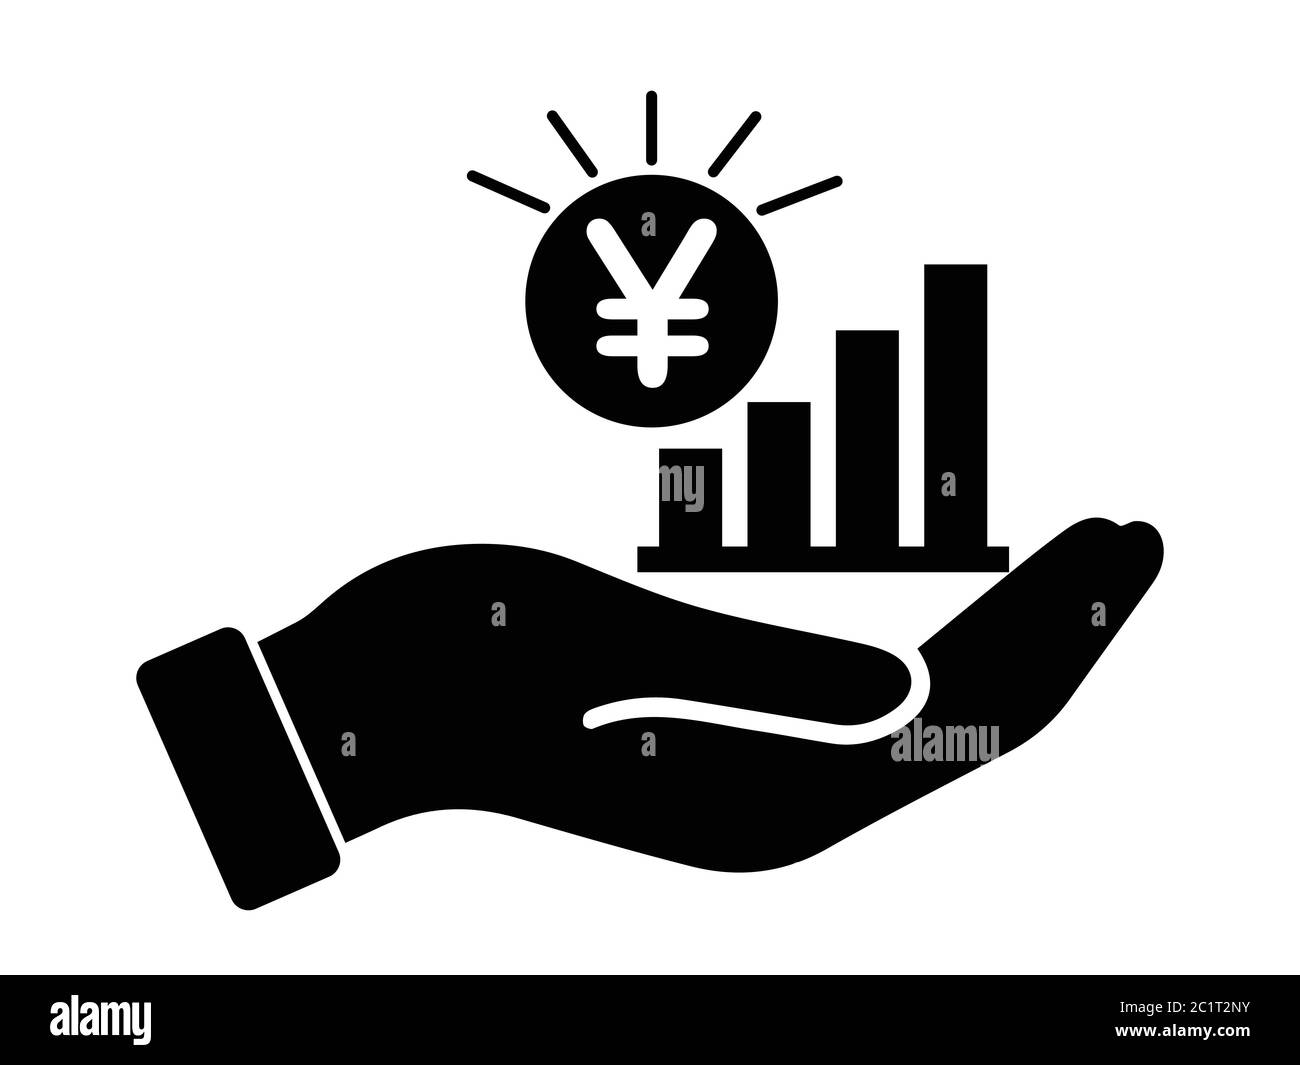 Palm Out JPY Japanese Yen Growth Bar Chart. Black Illustration Isolated on a White Background. EPS Vector Stock Vector